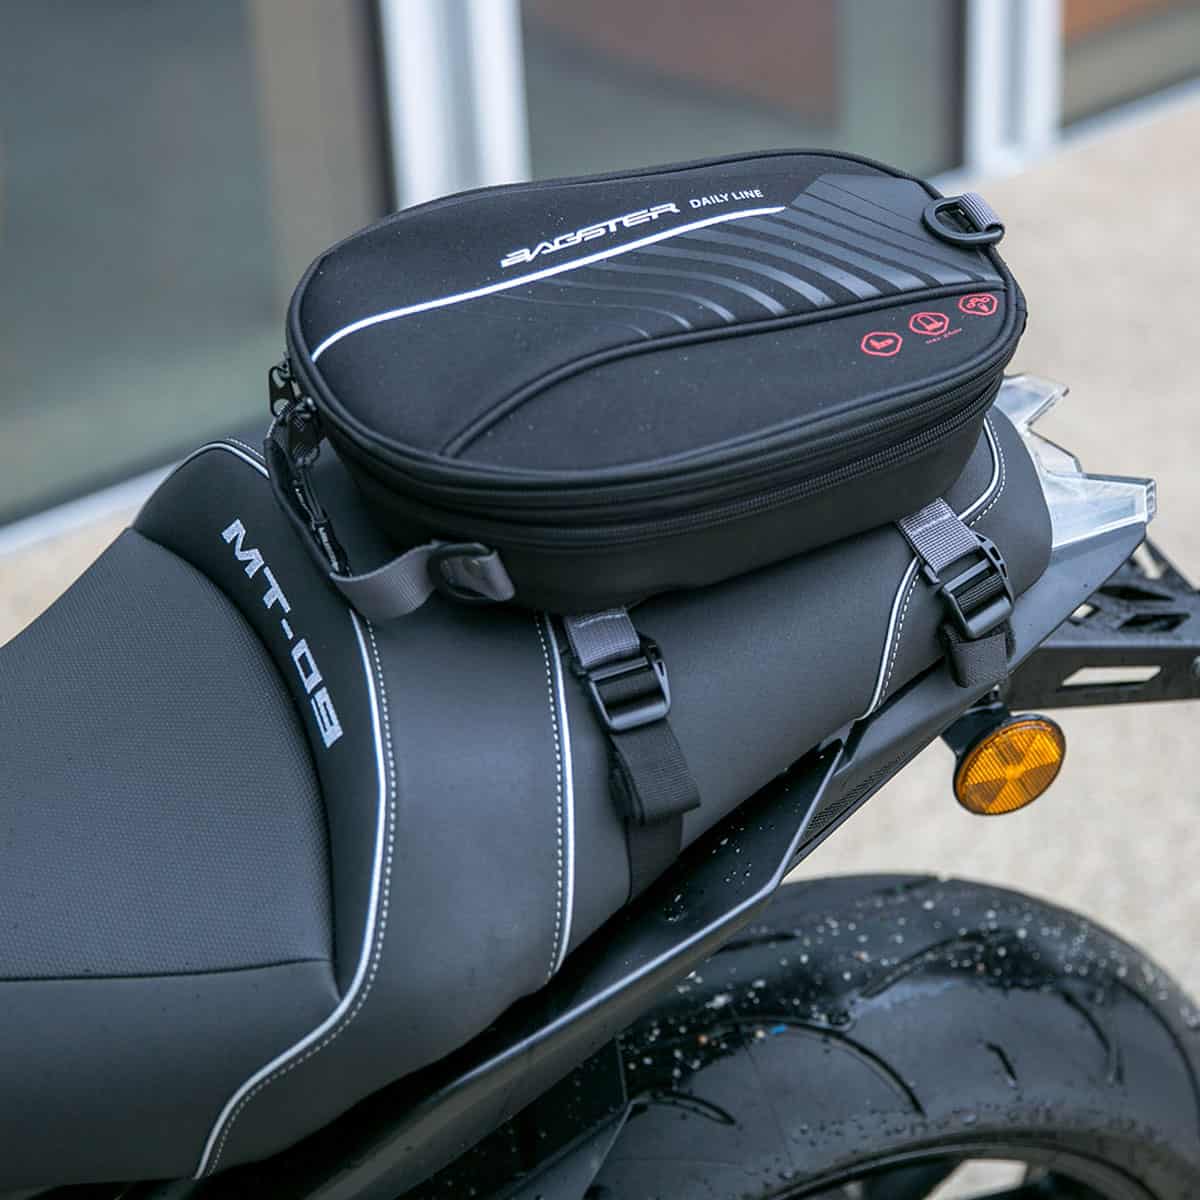 Introducing the Bagster Daily Line Locker saddlebag, perfect for your everyday adventures!